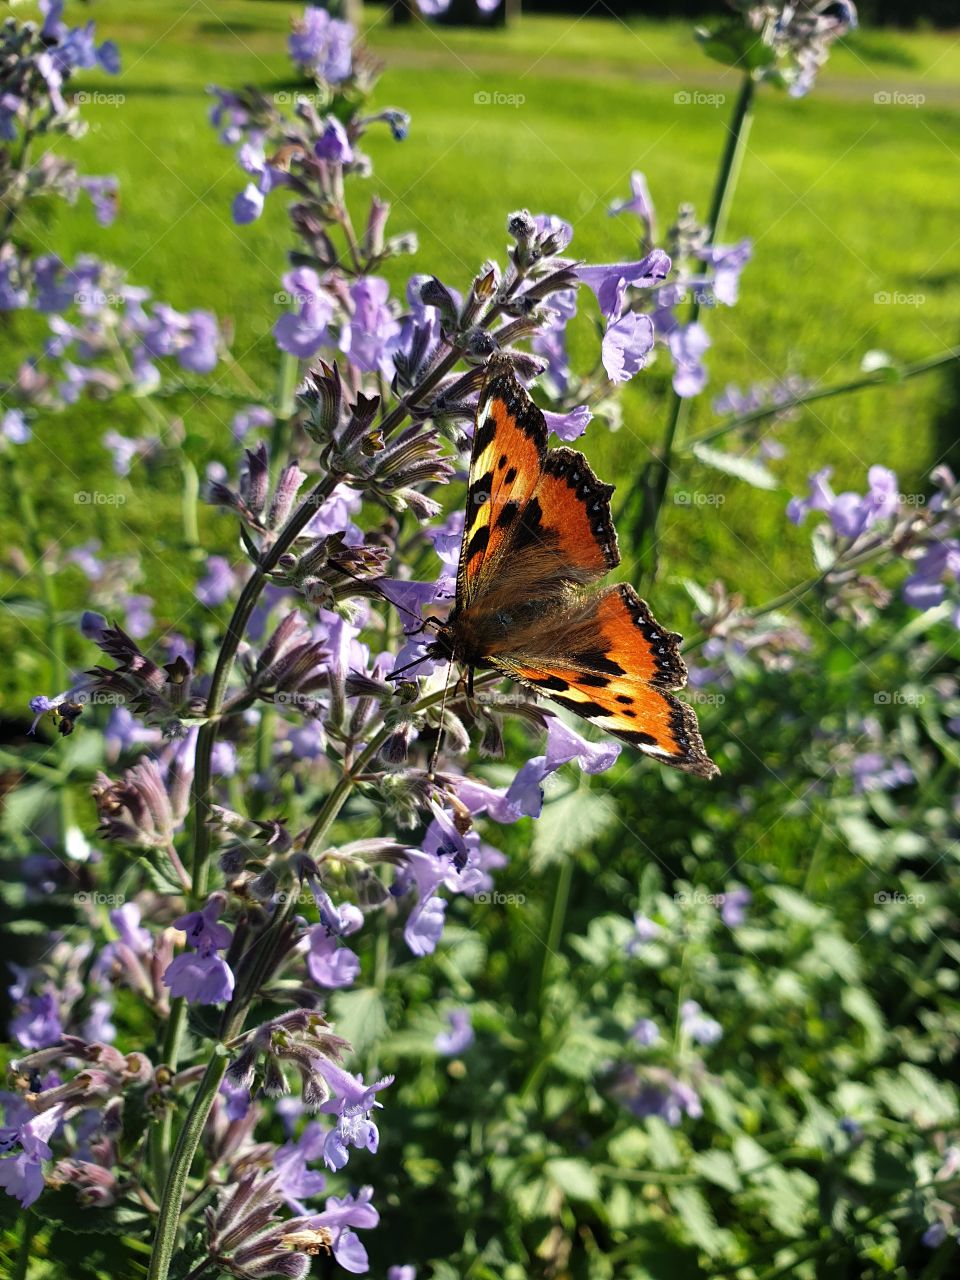 A colourful butterfly on a purple flower